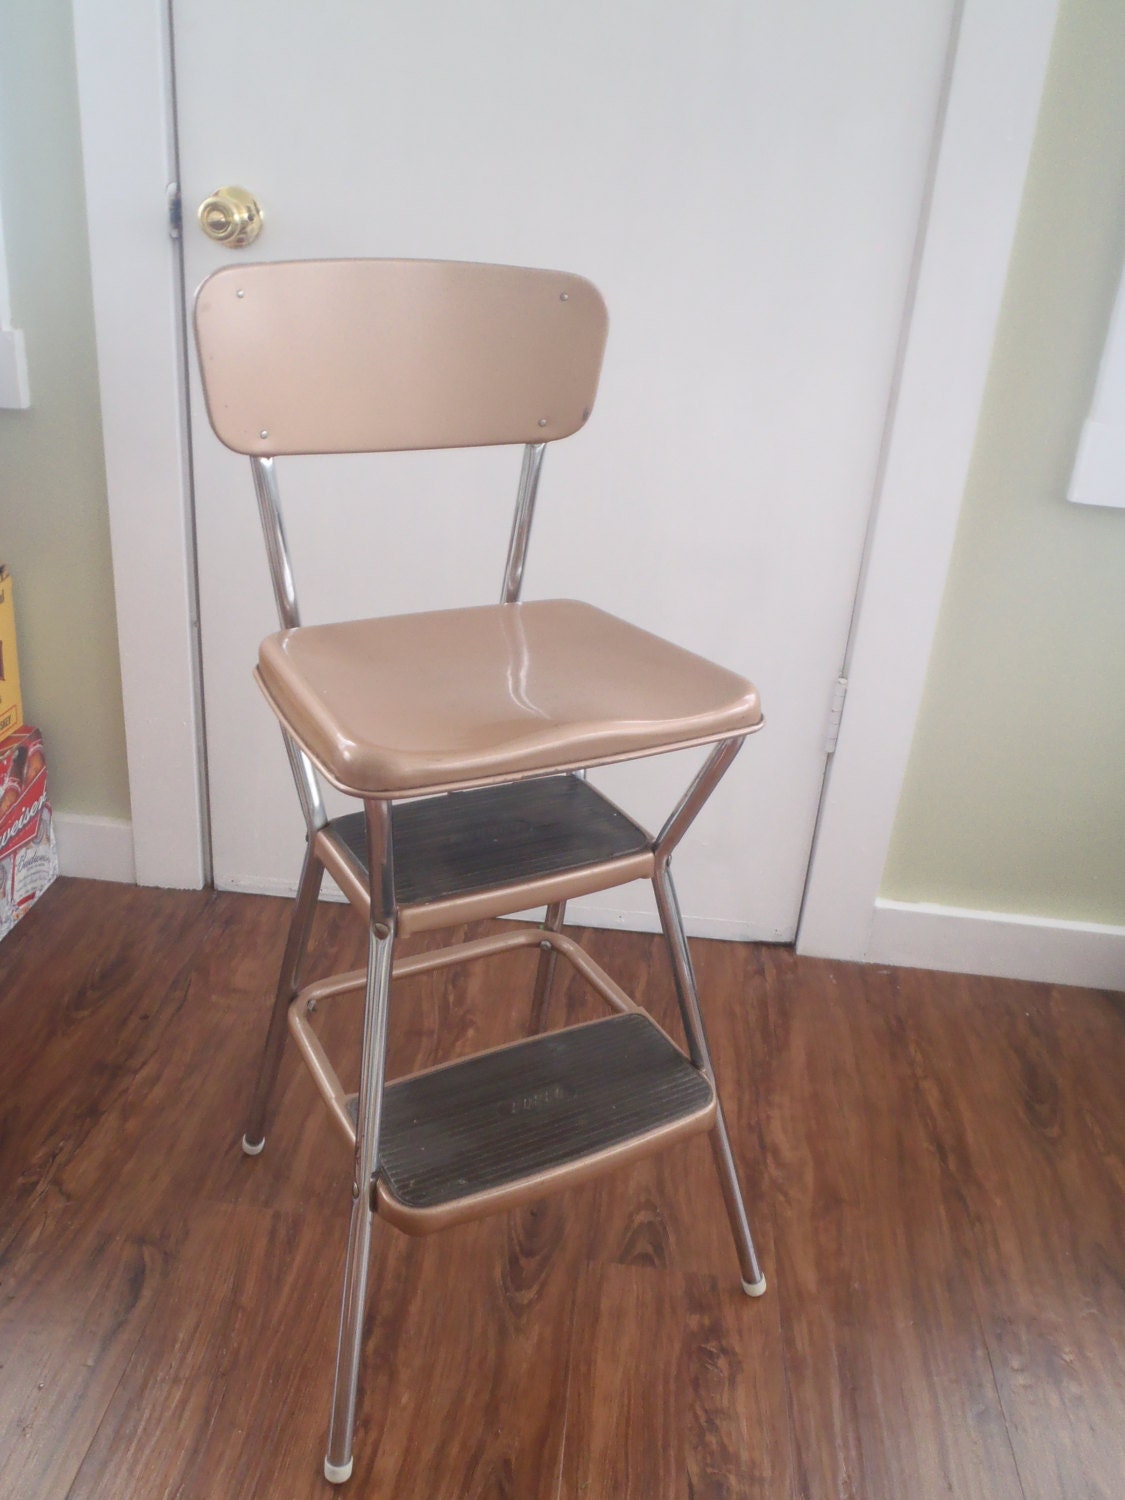 Vintage Cosco Kitchen Step Stool Chair with Flip Up Seat All